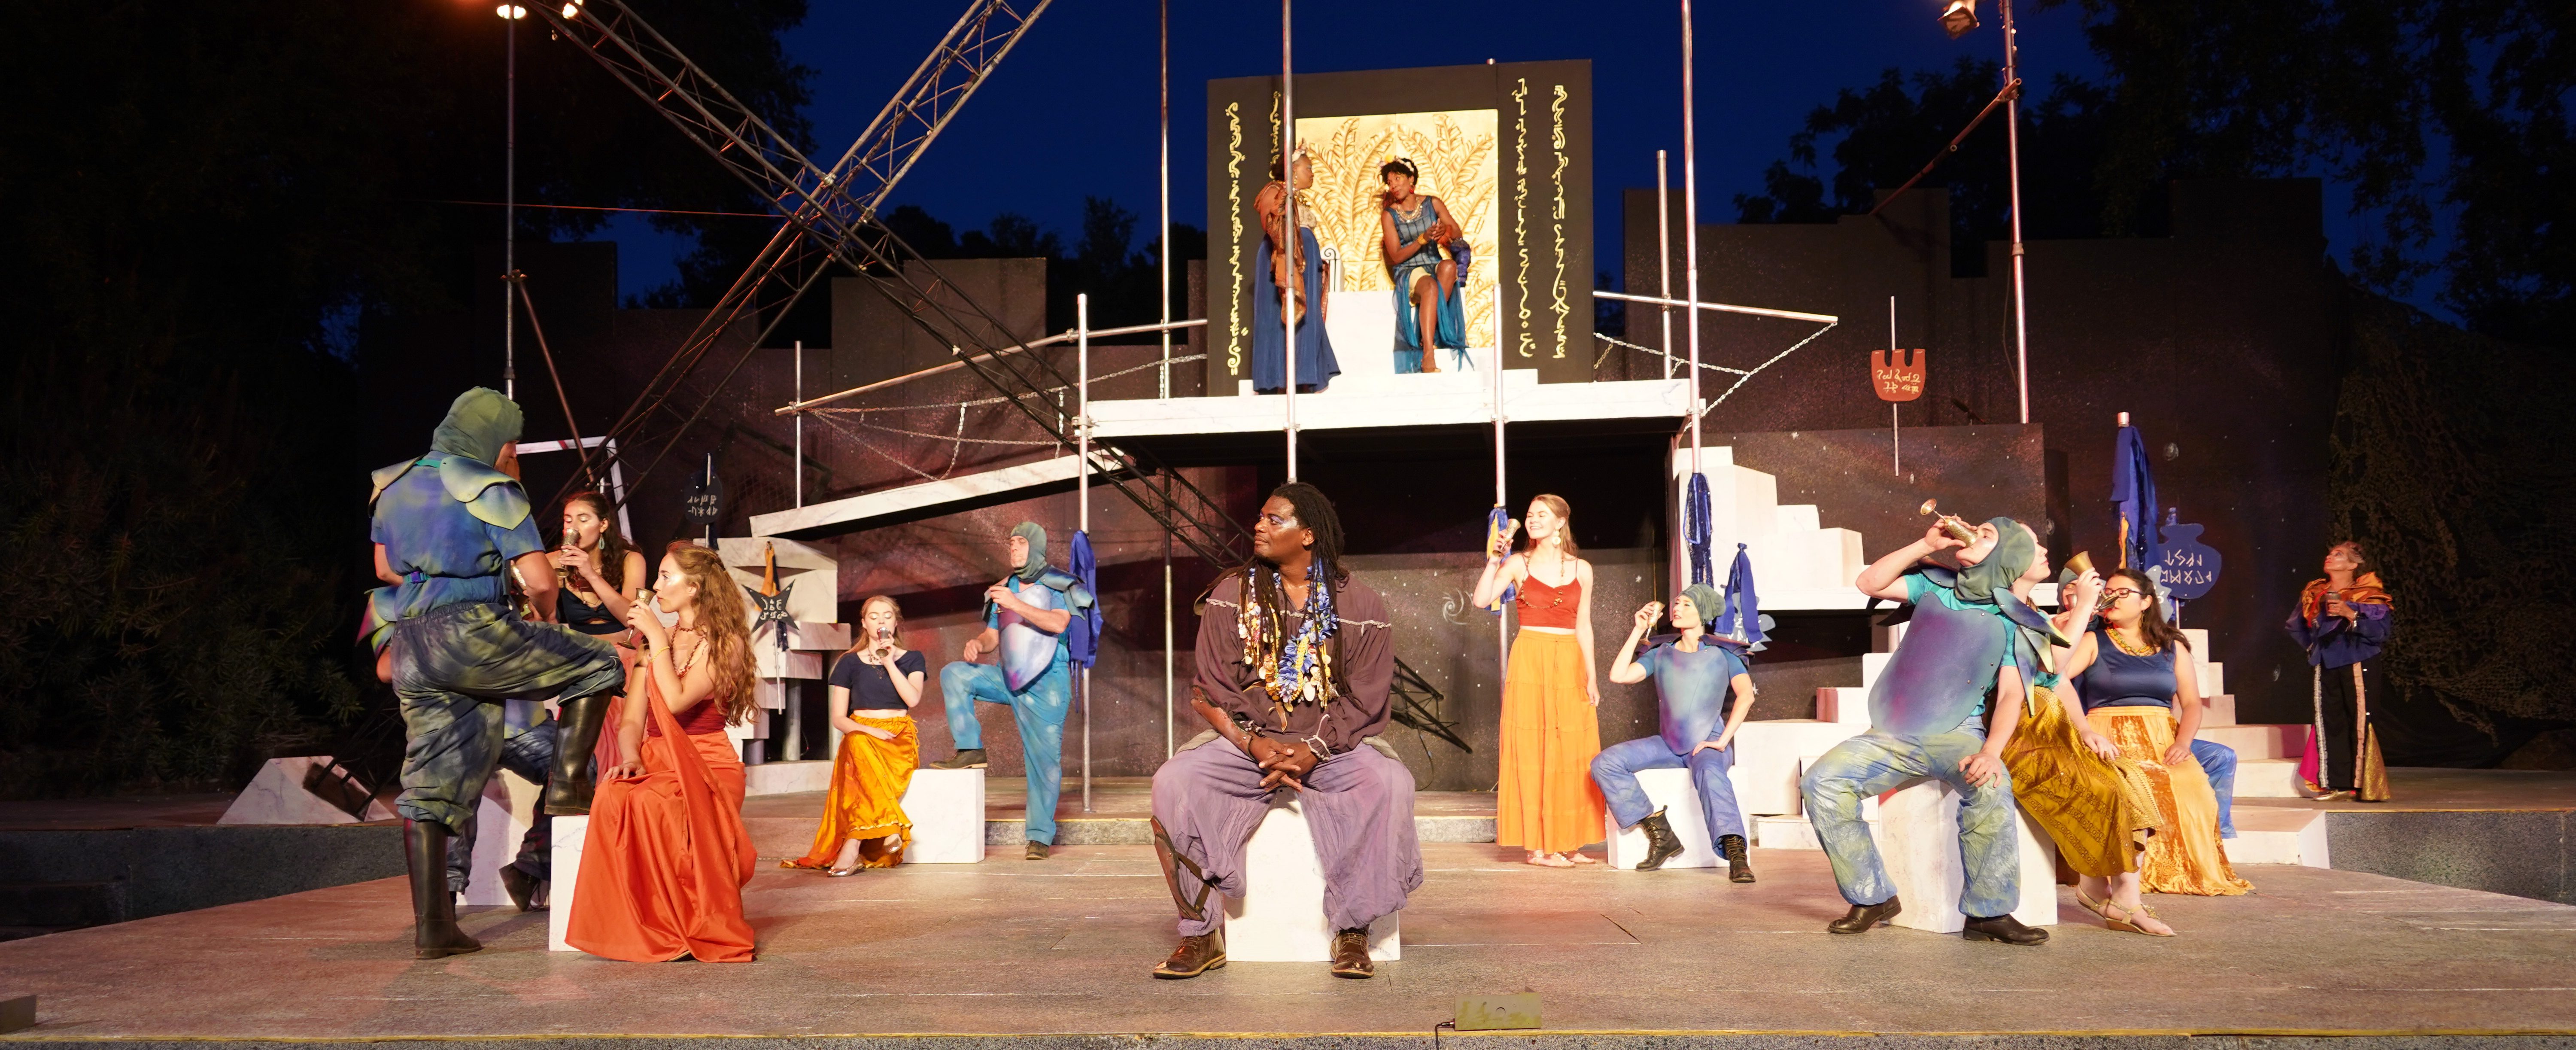 Igniting Social Change by bringing Shakespeare to life